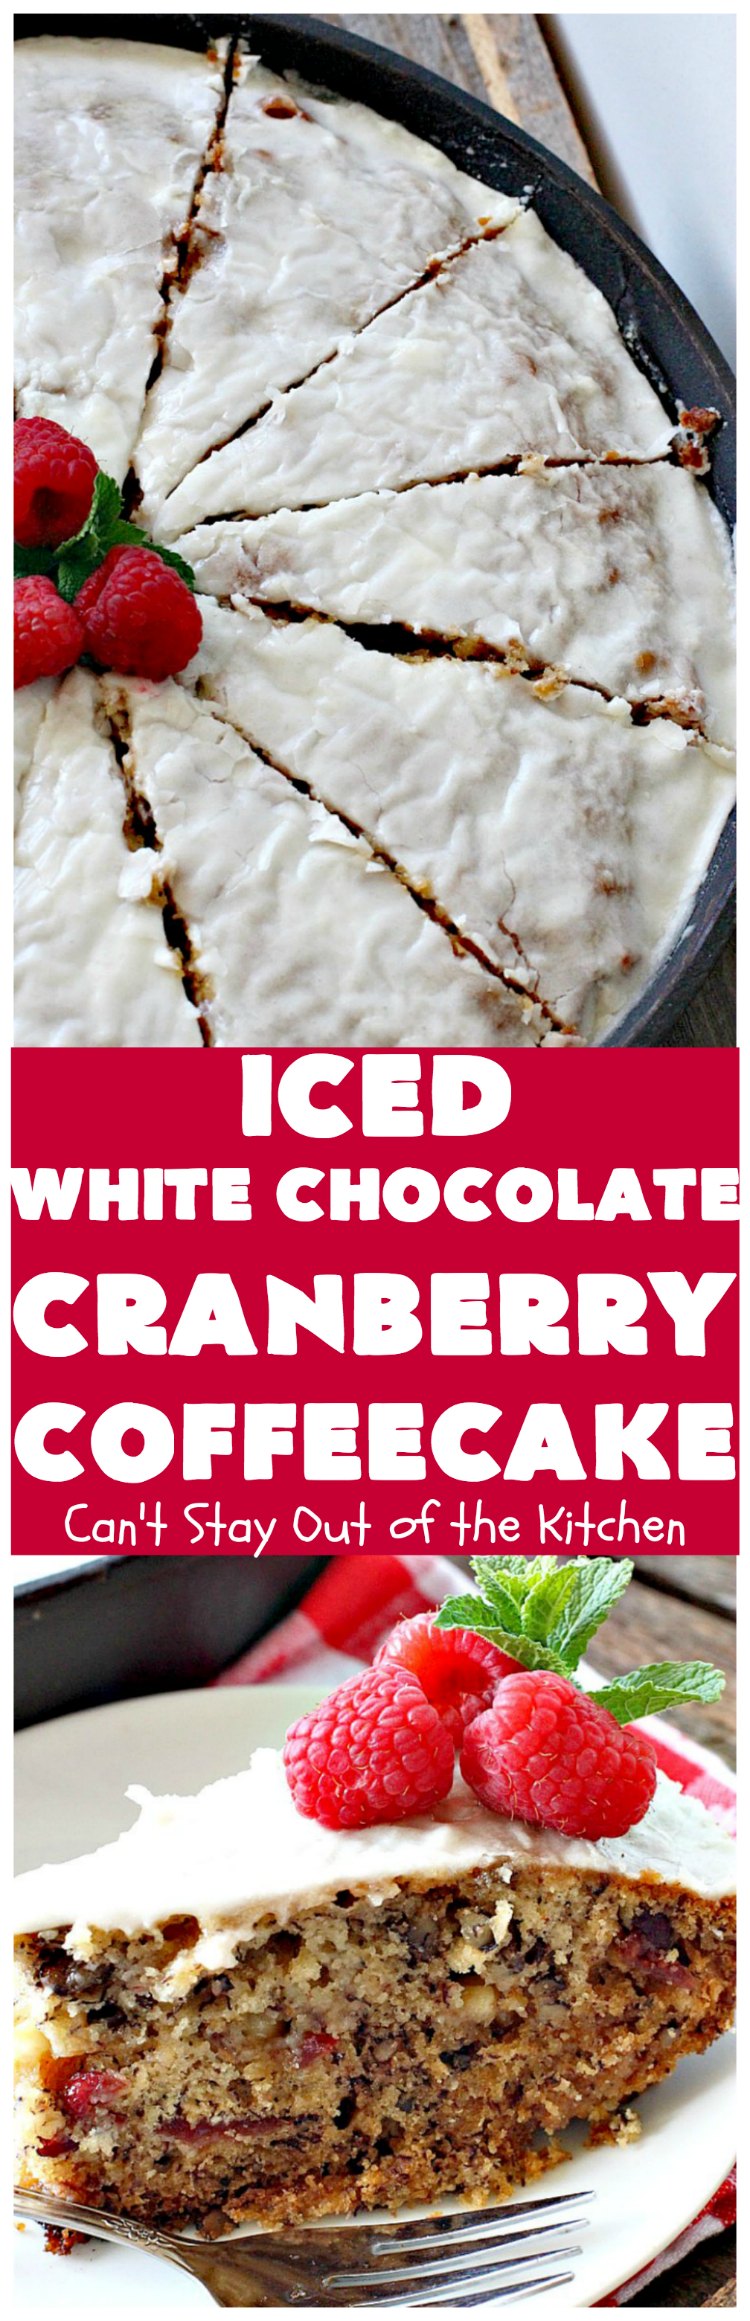 Iced White Chocolate Cranberry Coffeecake | Can't Stay Out of the Kitchen